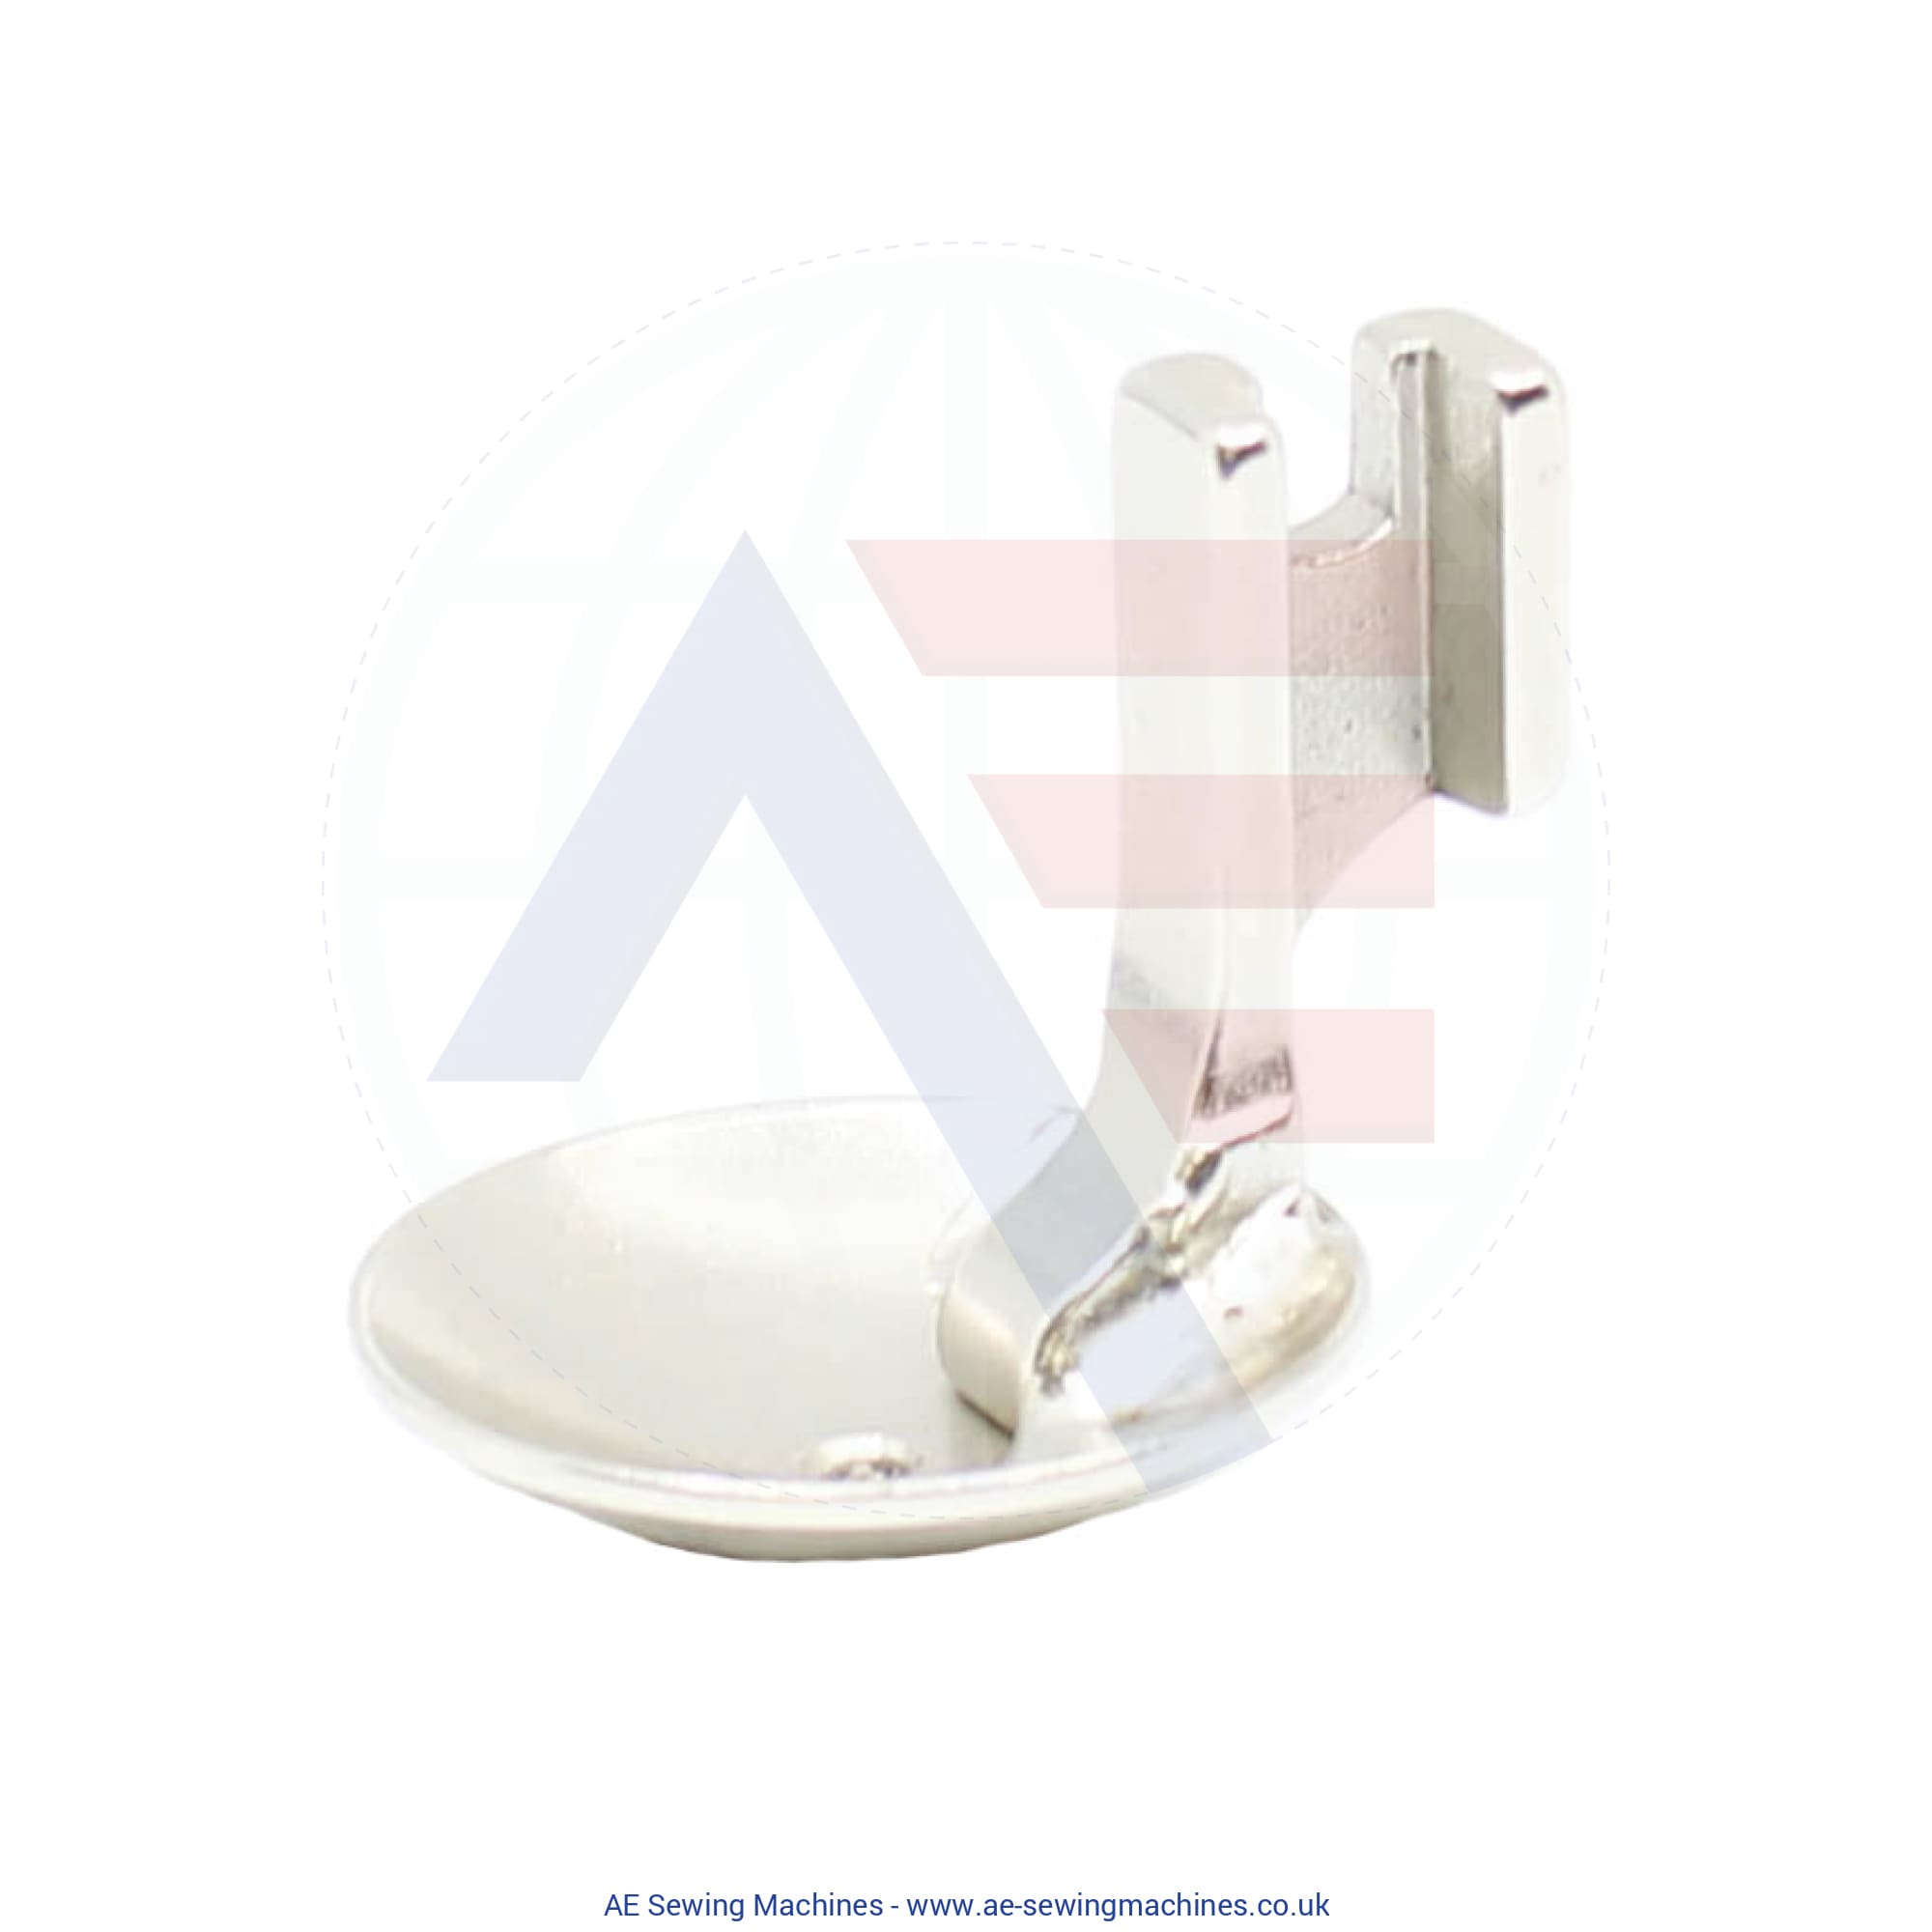 Qs1 Quilter Foot Sewing Machine Spare Parts